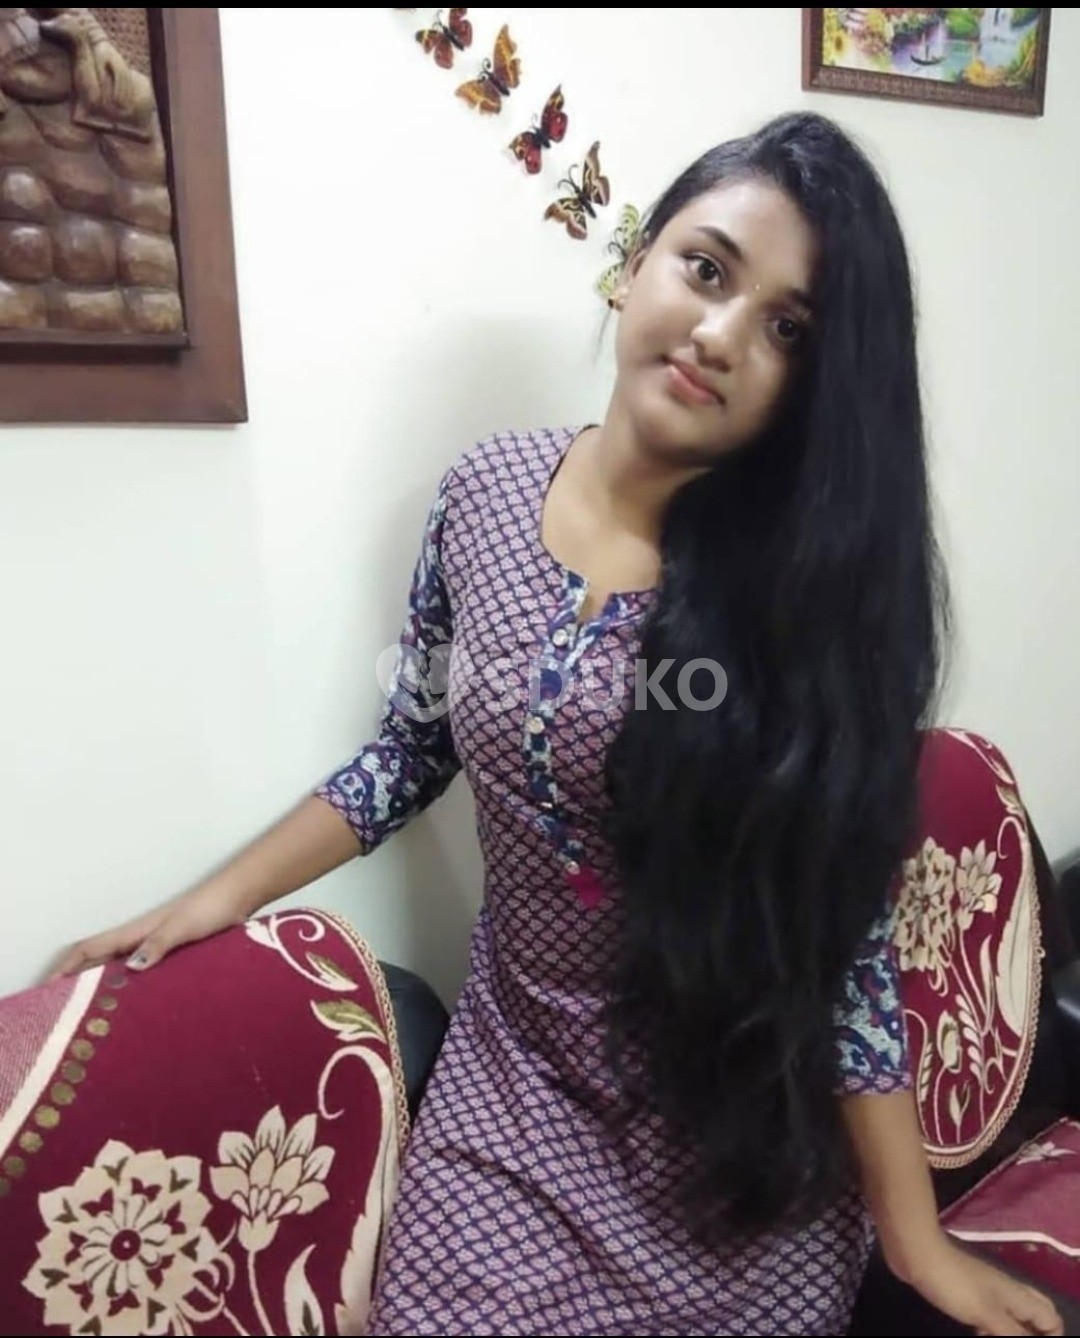 _chennai 💙_MY SELF DIVYA UNLIMITED SEX CUTE BEST SERVICE AND 24 HR AVAILABLE